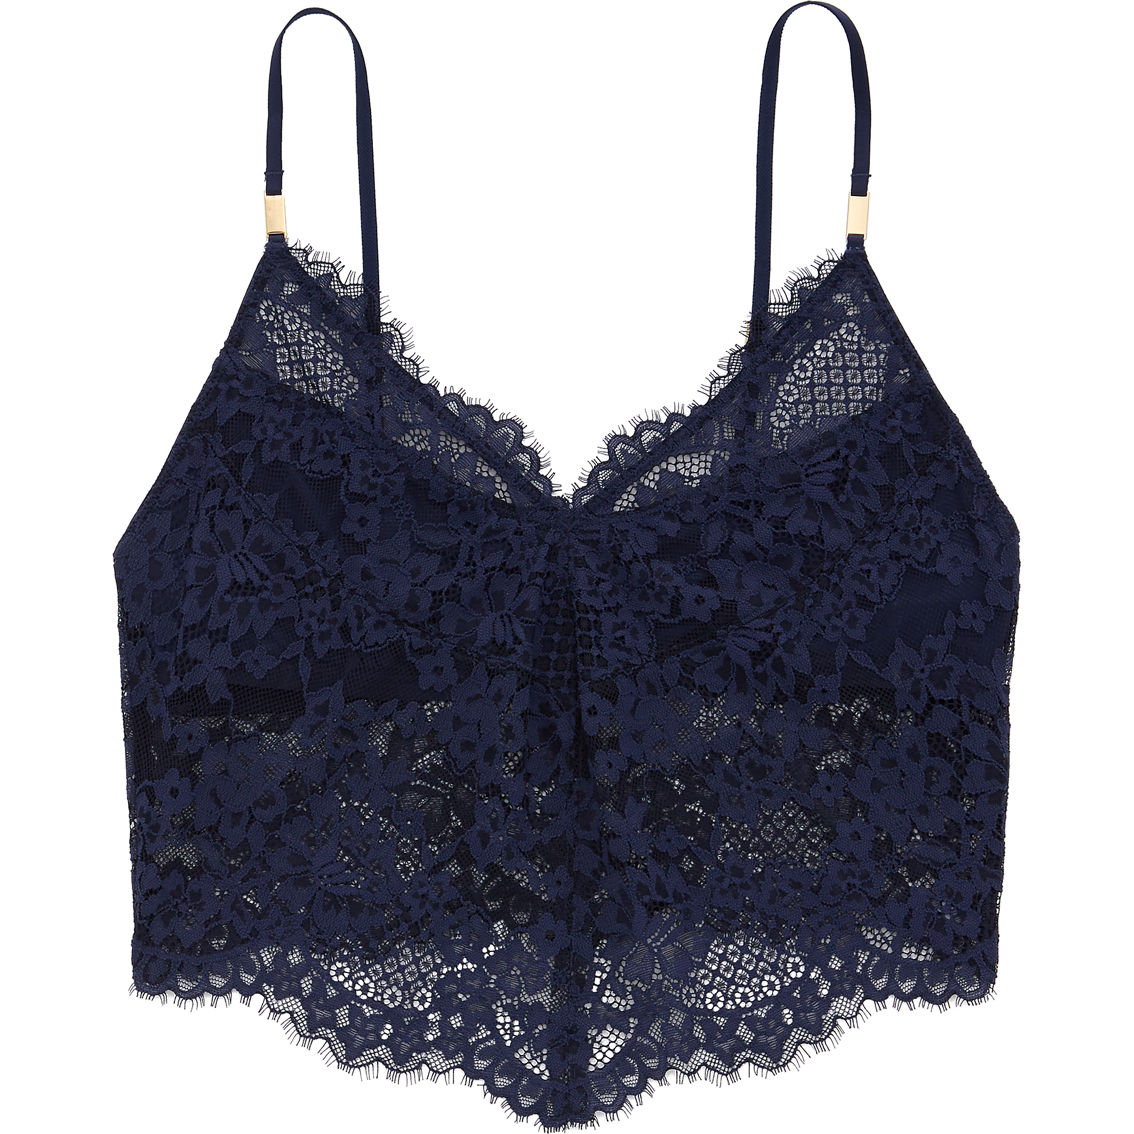 Aerie Show Off Lace Corset Bra Top, Bras, Clothing & Accessories